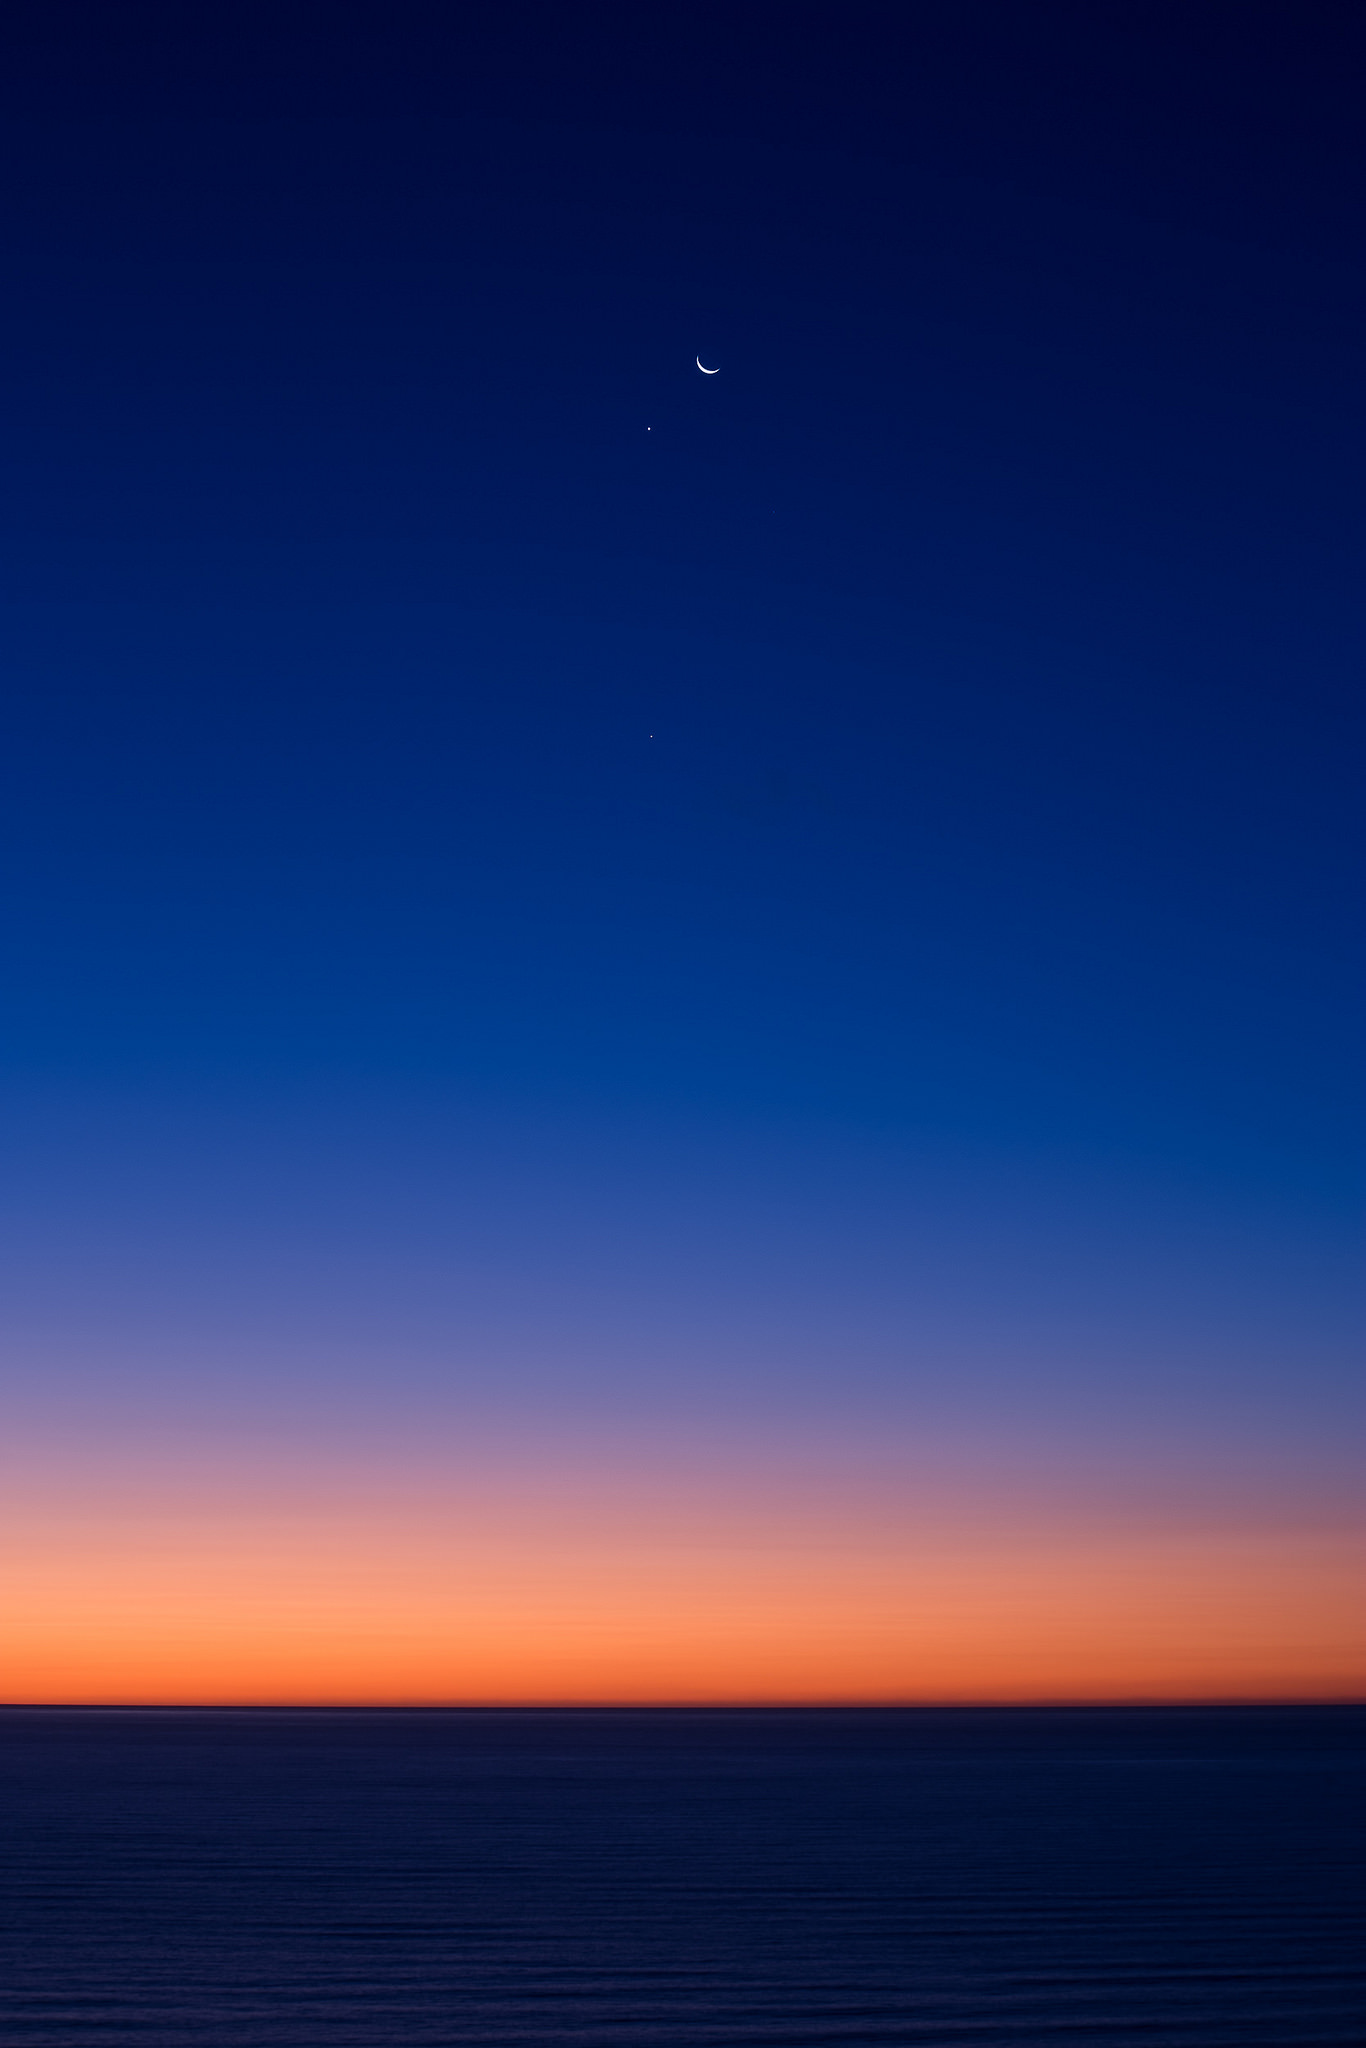 The moon, Venus to the left and Jupiter below.